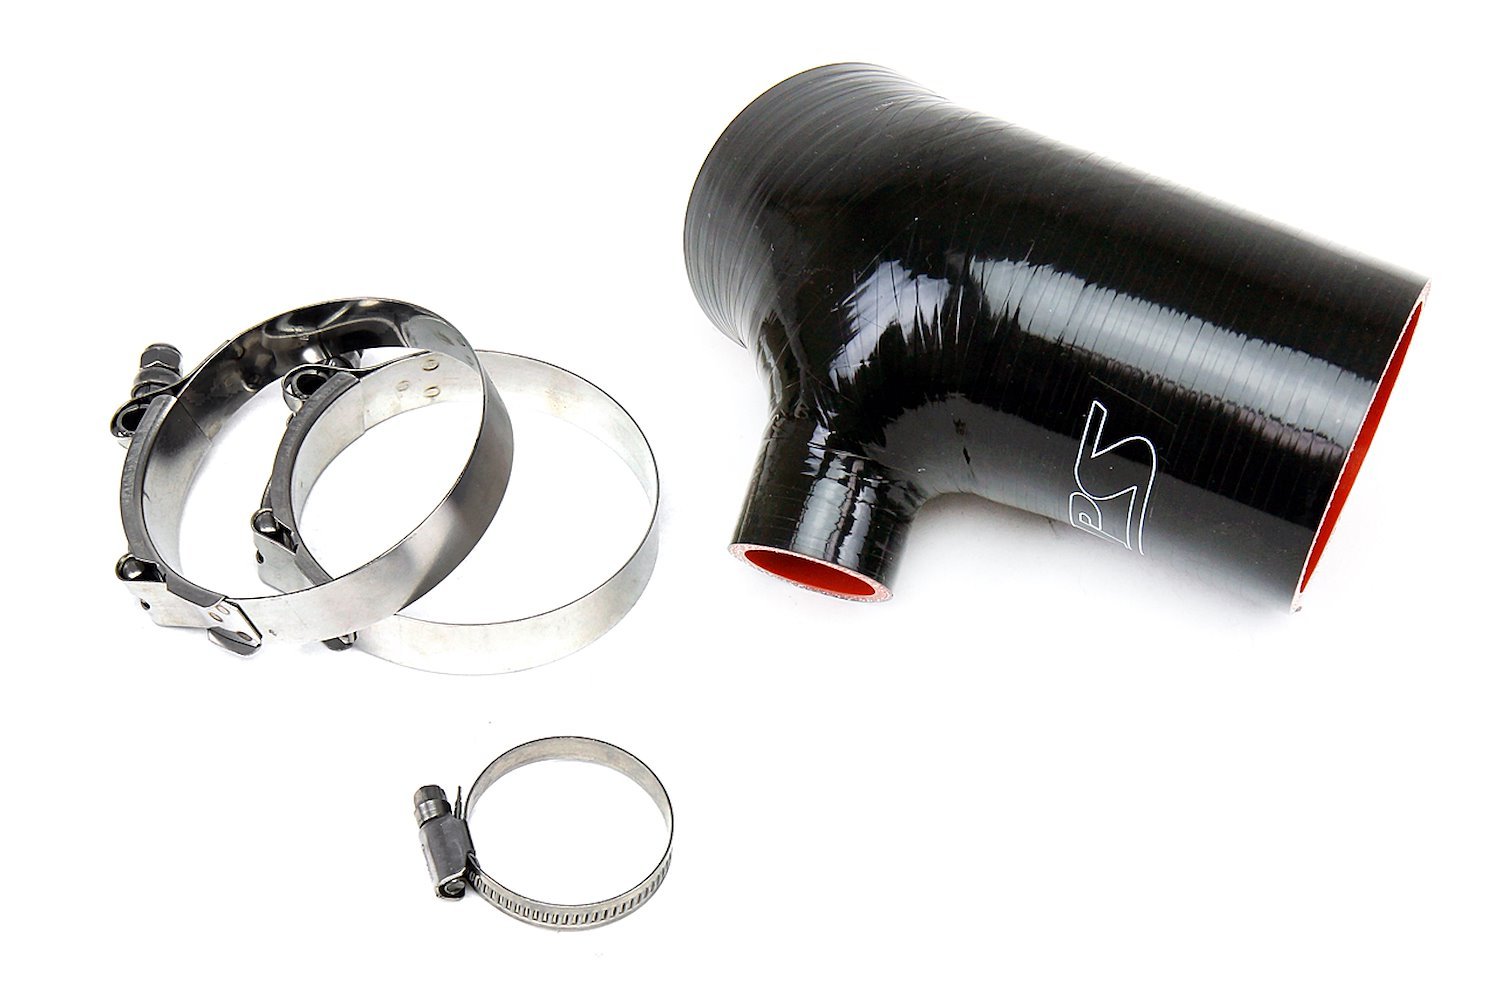 57-1544-BLK Silicone Air Intake, Dyno Proven +4 HP, +4.1 TQ, High Air Flow, Better Throttle Response